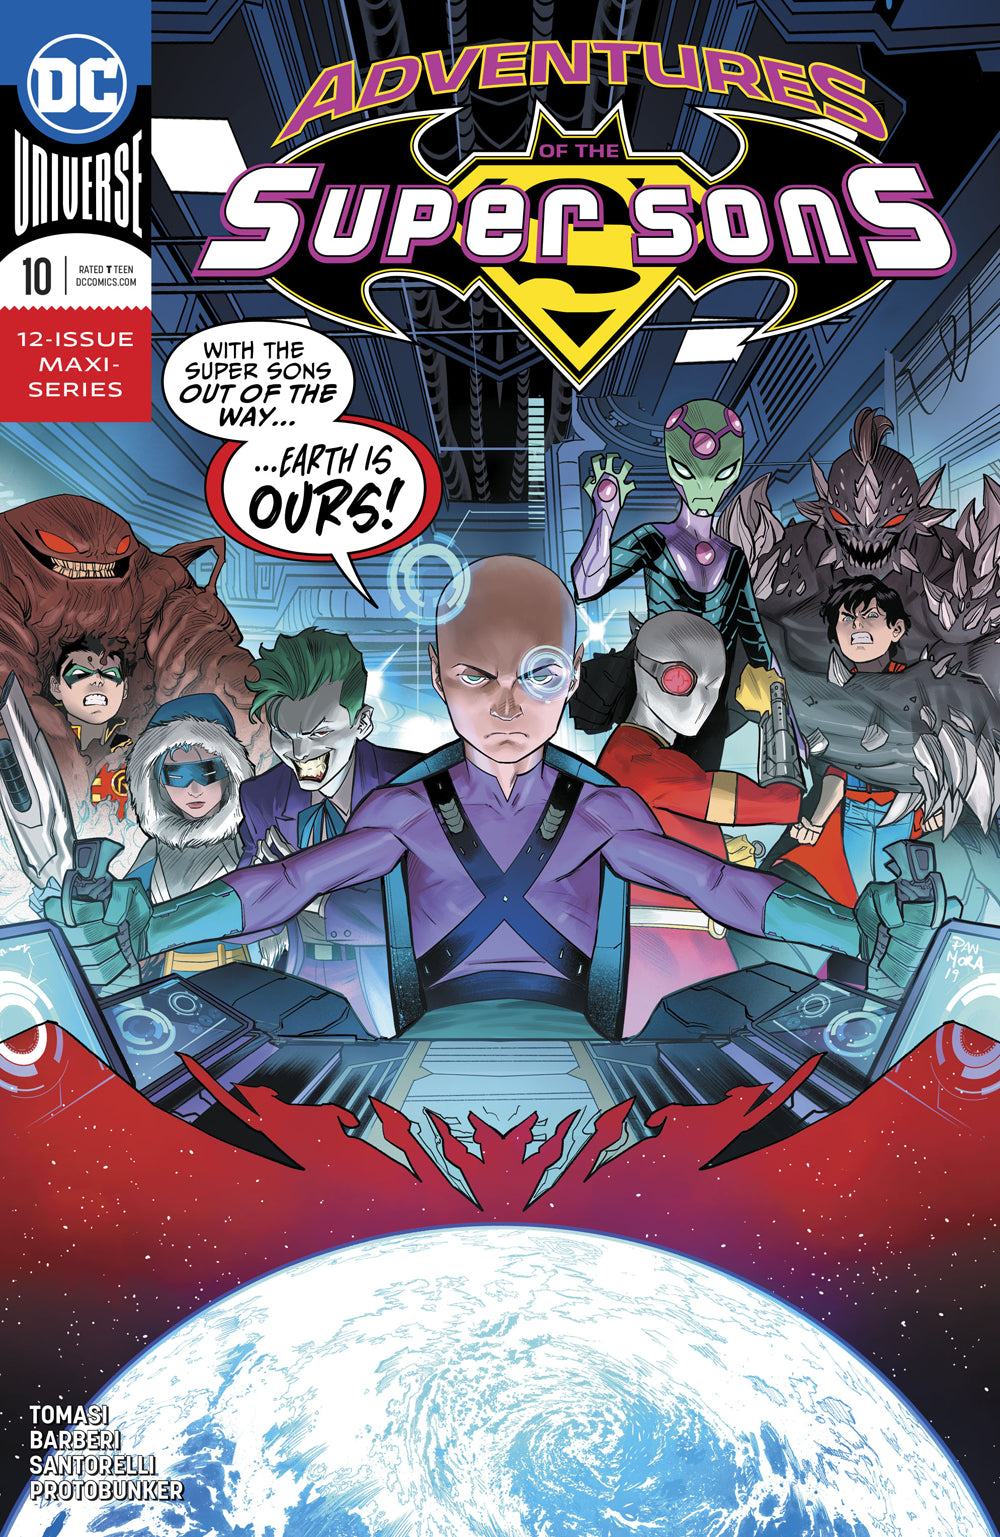 ADVENTURES OF THE SUPER SONS #10 (OF 12) | Game Master's Emporium (The New GME)